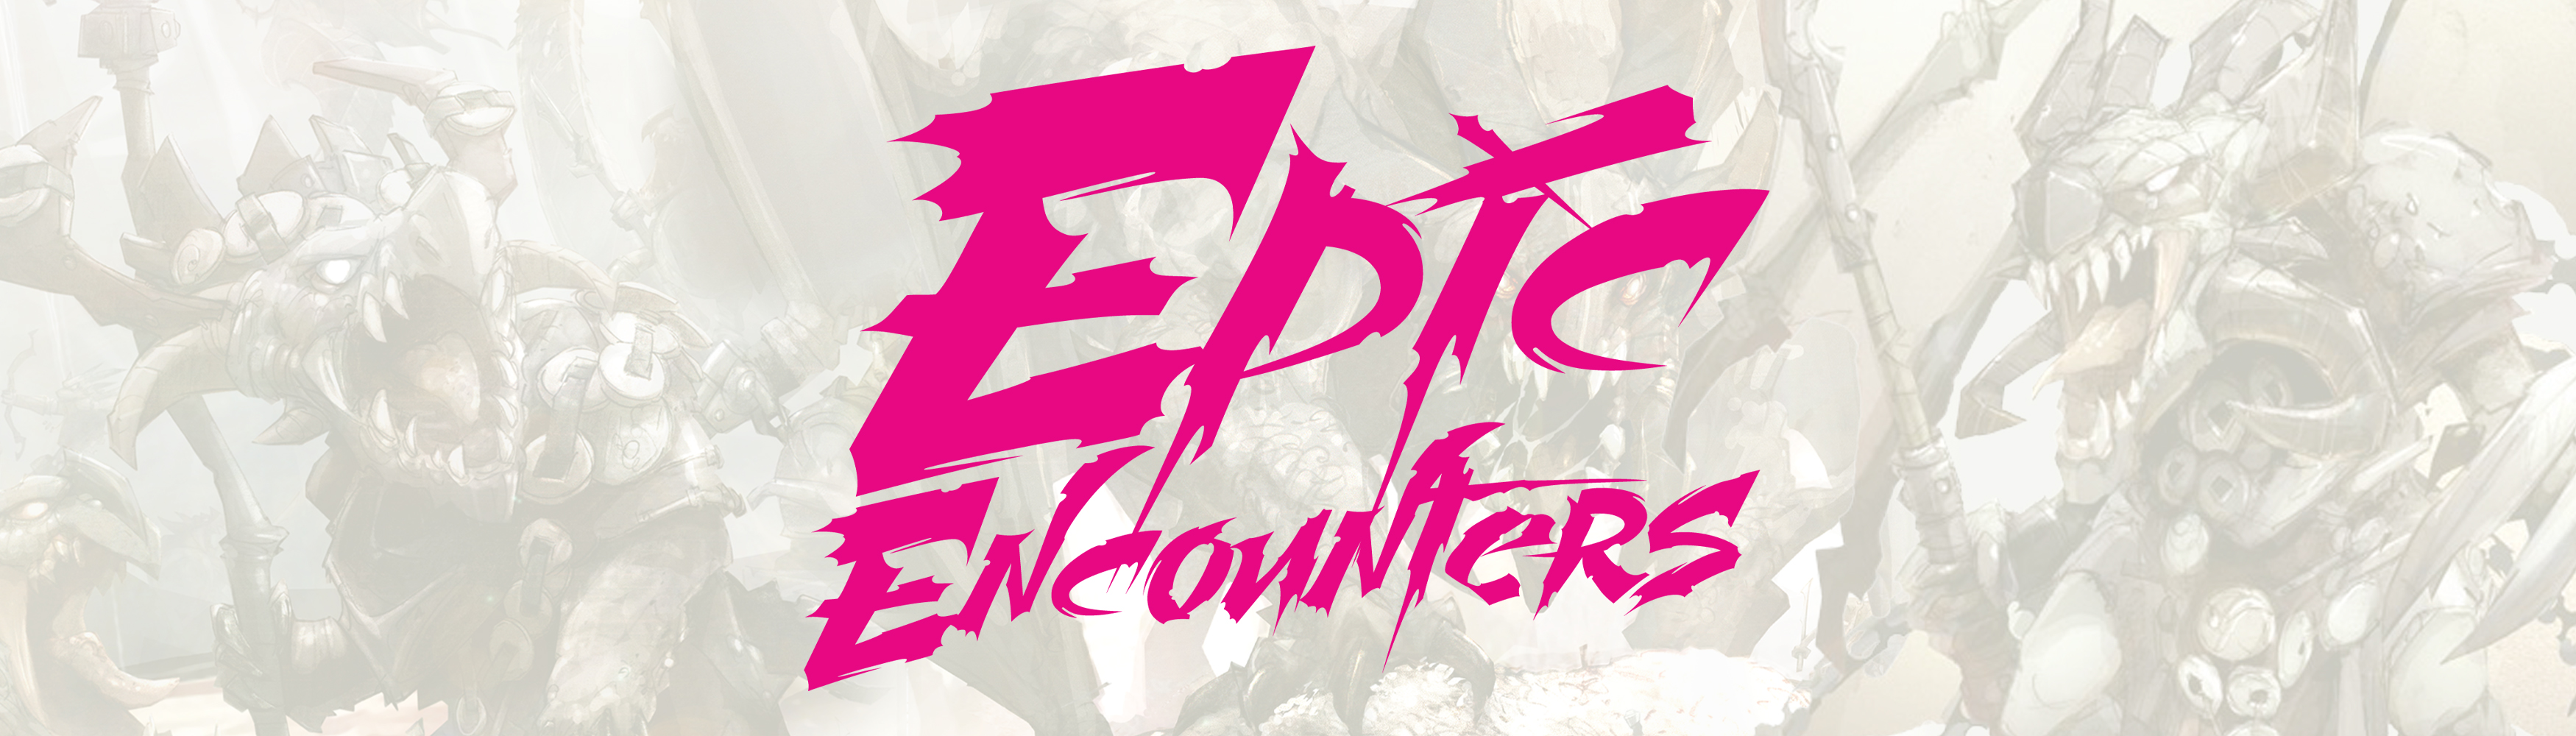 Epic Encounters banner 